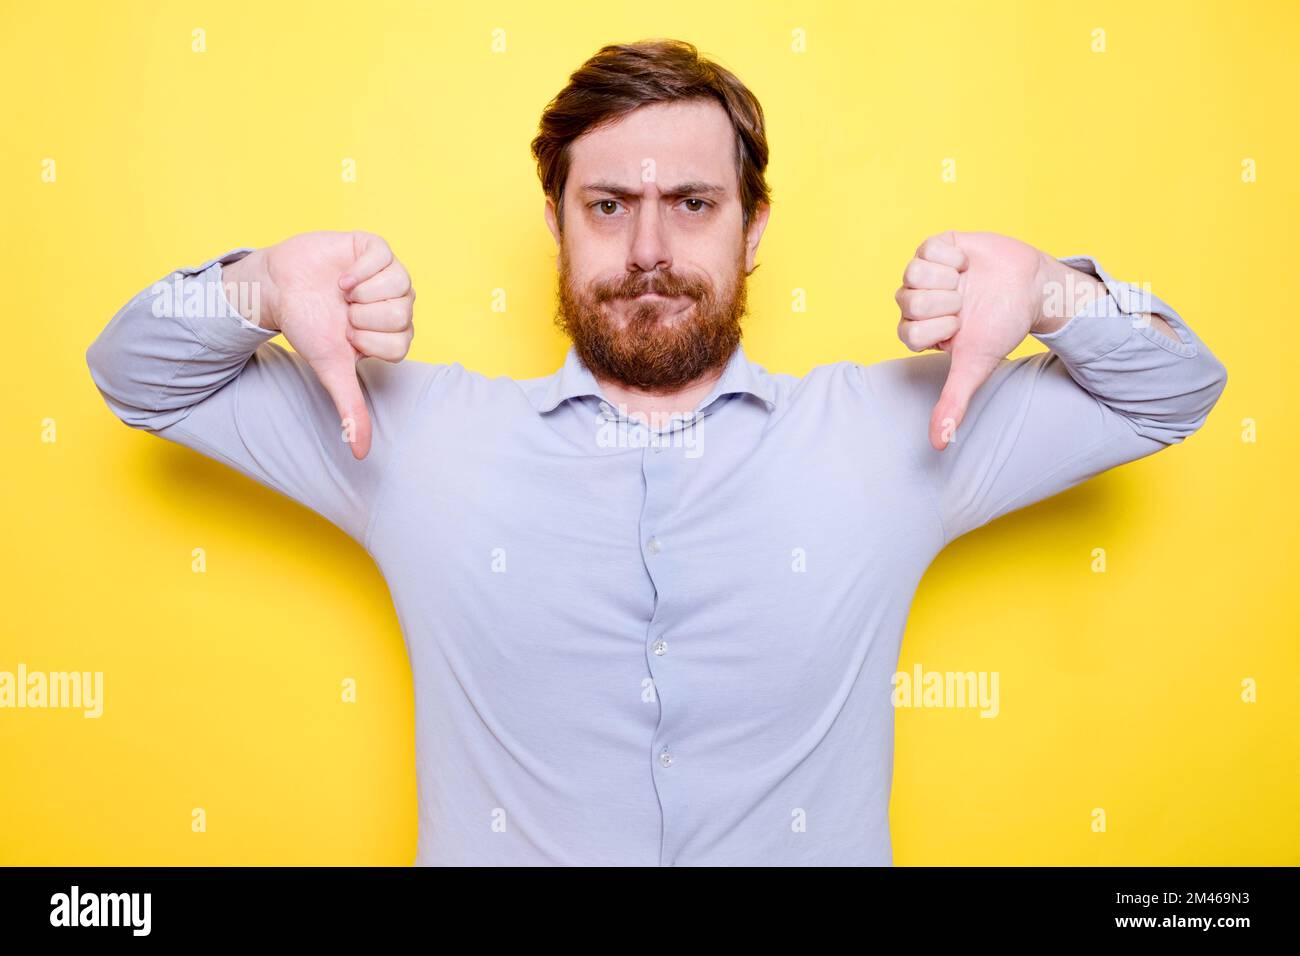 Man isolated on yellow background showing thumb down, disappointment concept Stock Photo